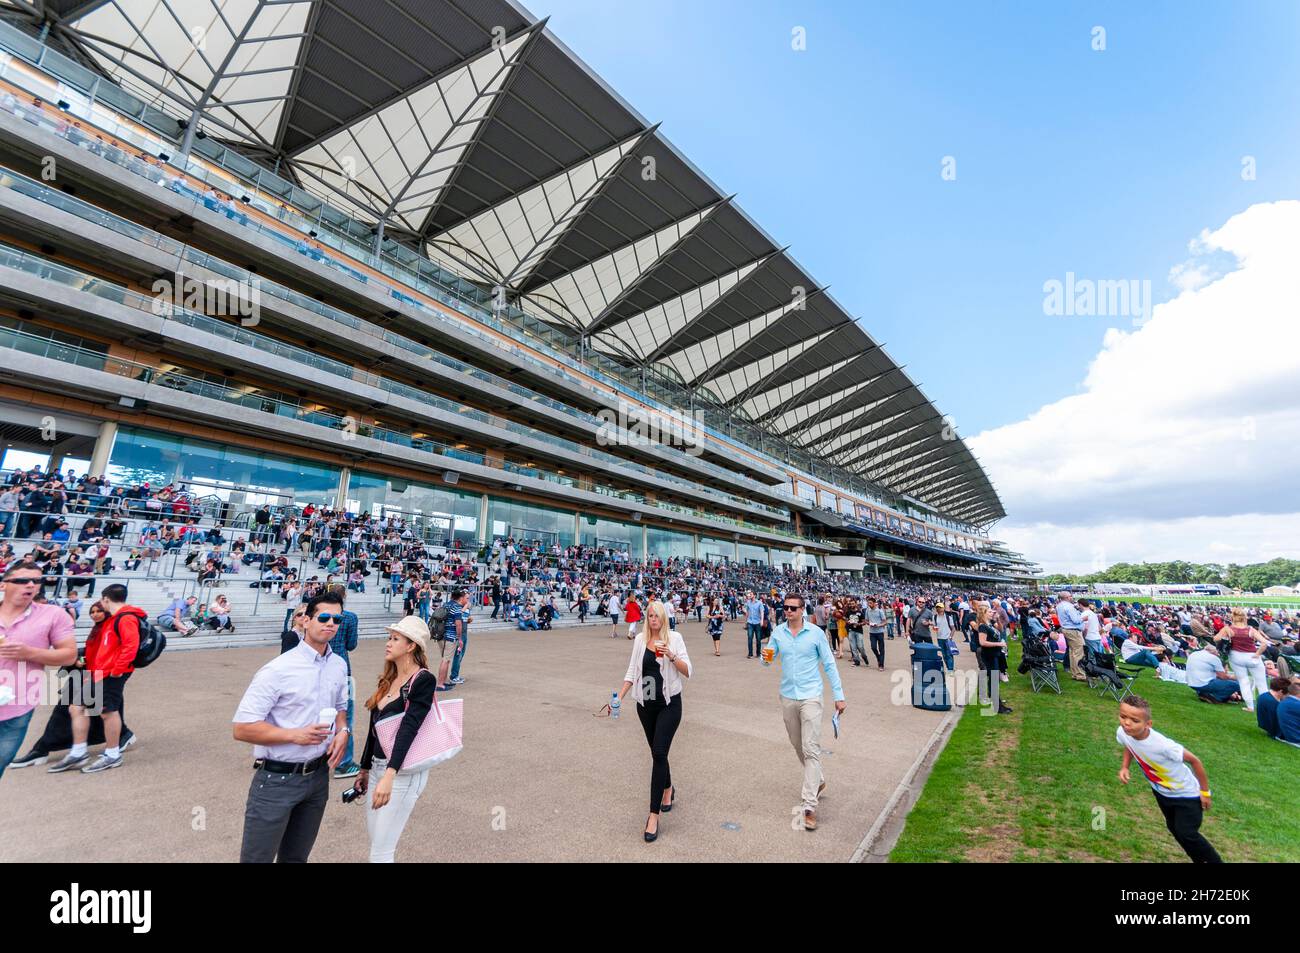 Grandstand at Royal Ascot racecourse, Royal Berkshire, UK, during the Red Bull Air Race. Public visitors below the stand Stock Photo